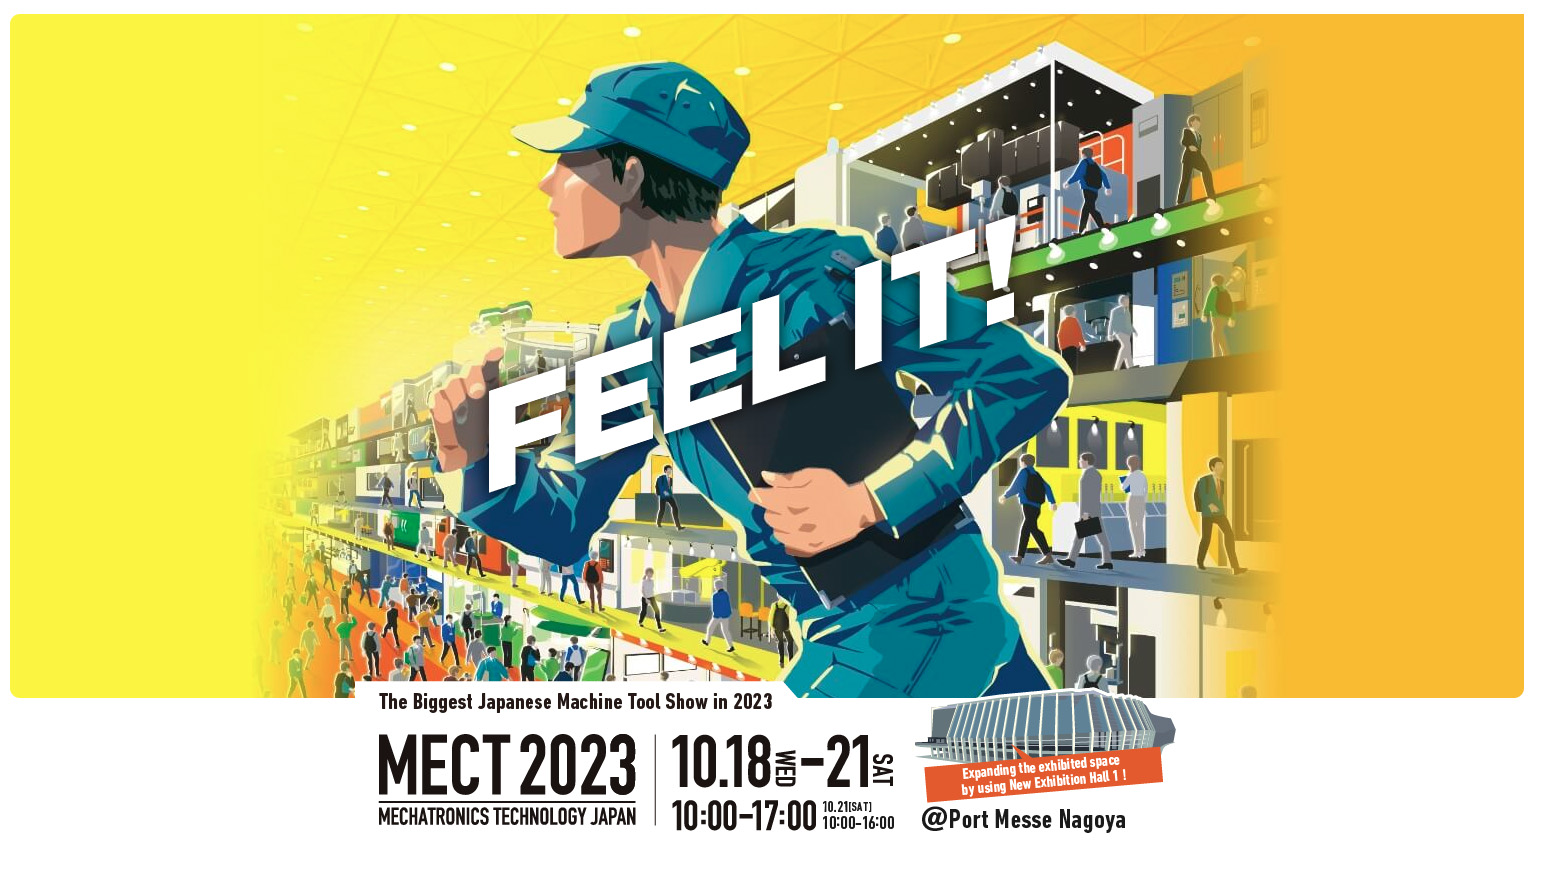 MECT 2023